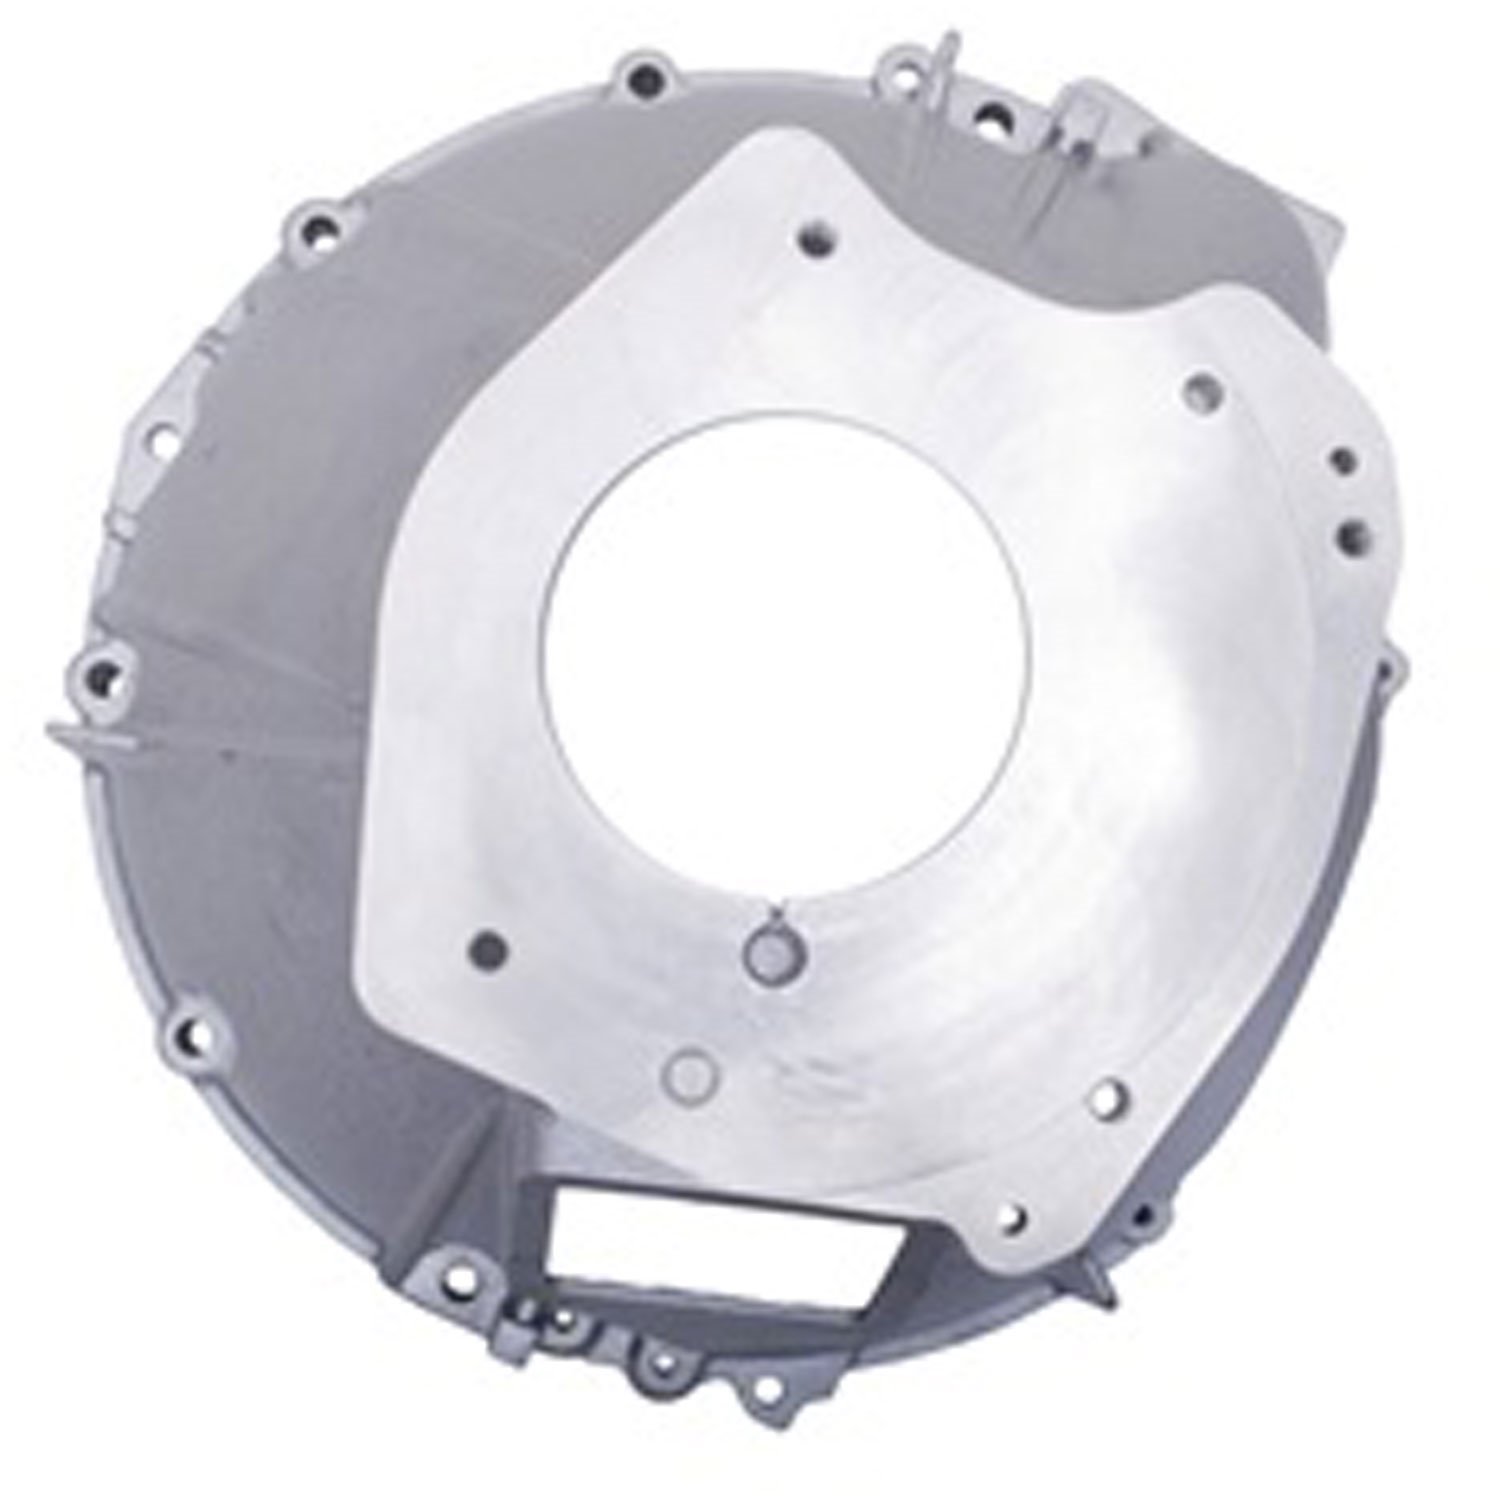 This transmission bellhousing from Omix-ADA fits 82-86 Jeep CJ models with SR4 T4 or T5 transmissions.